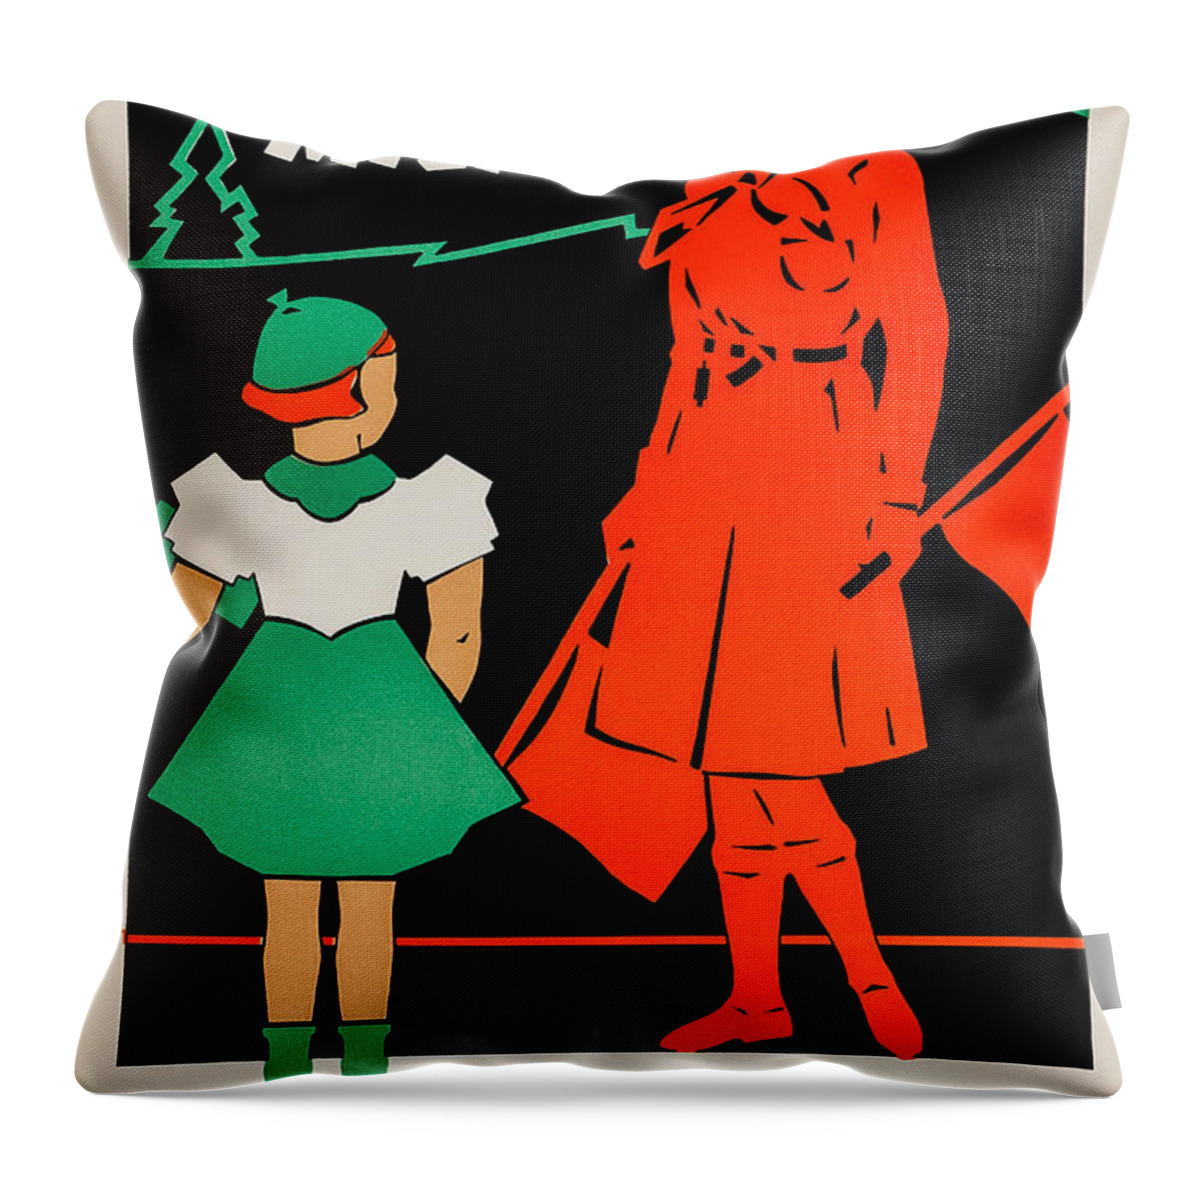 Milk Throw Pillow featuring the painting Drink Milk! by Gordon Deacon